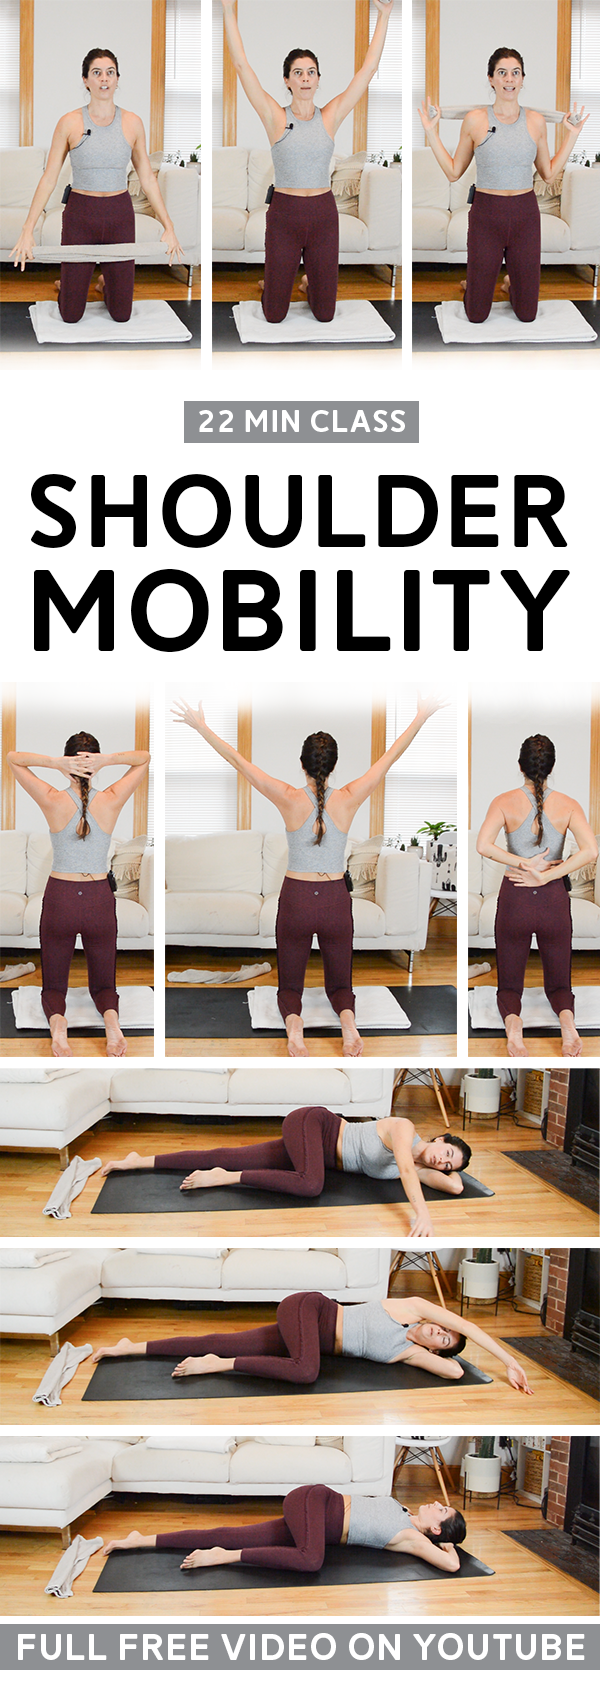 Shoulder Mobility (22 Min Class) - Grab a dish towel or yoga strap for this shoulder mobility workout class. Full free video available on YouTube. #shouldermobility #mobility #shoulderexercises